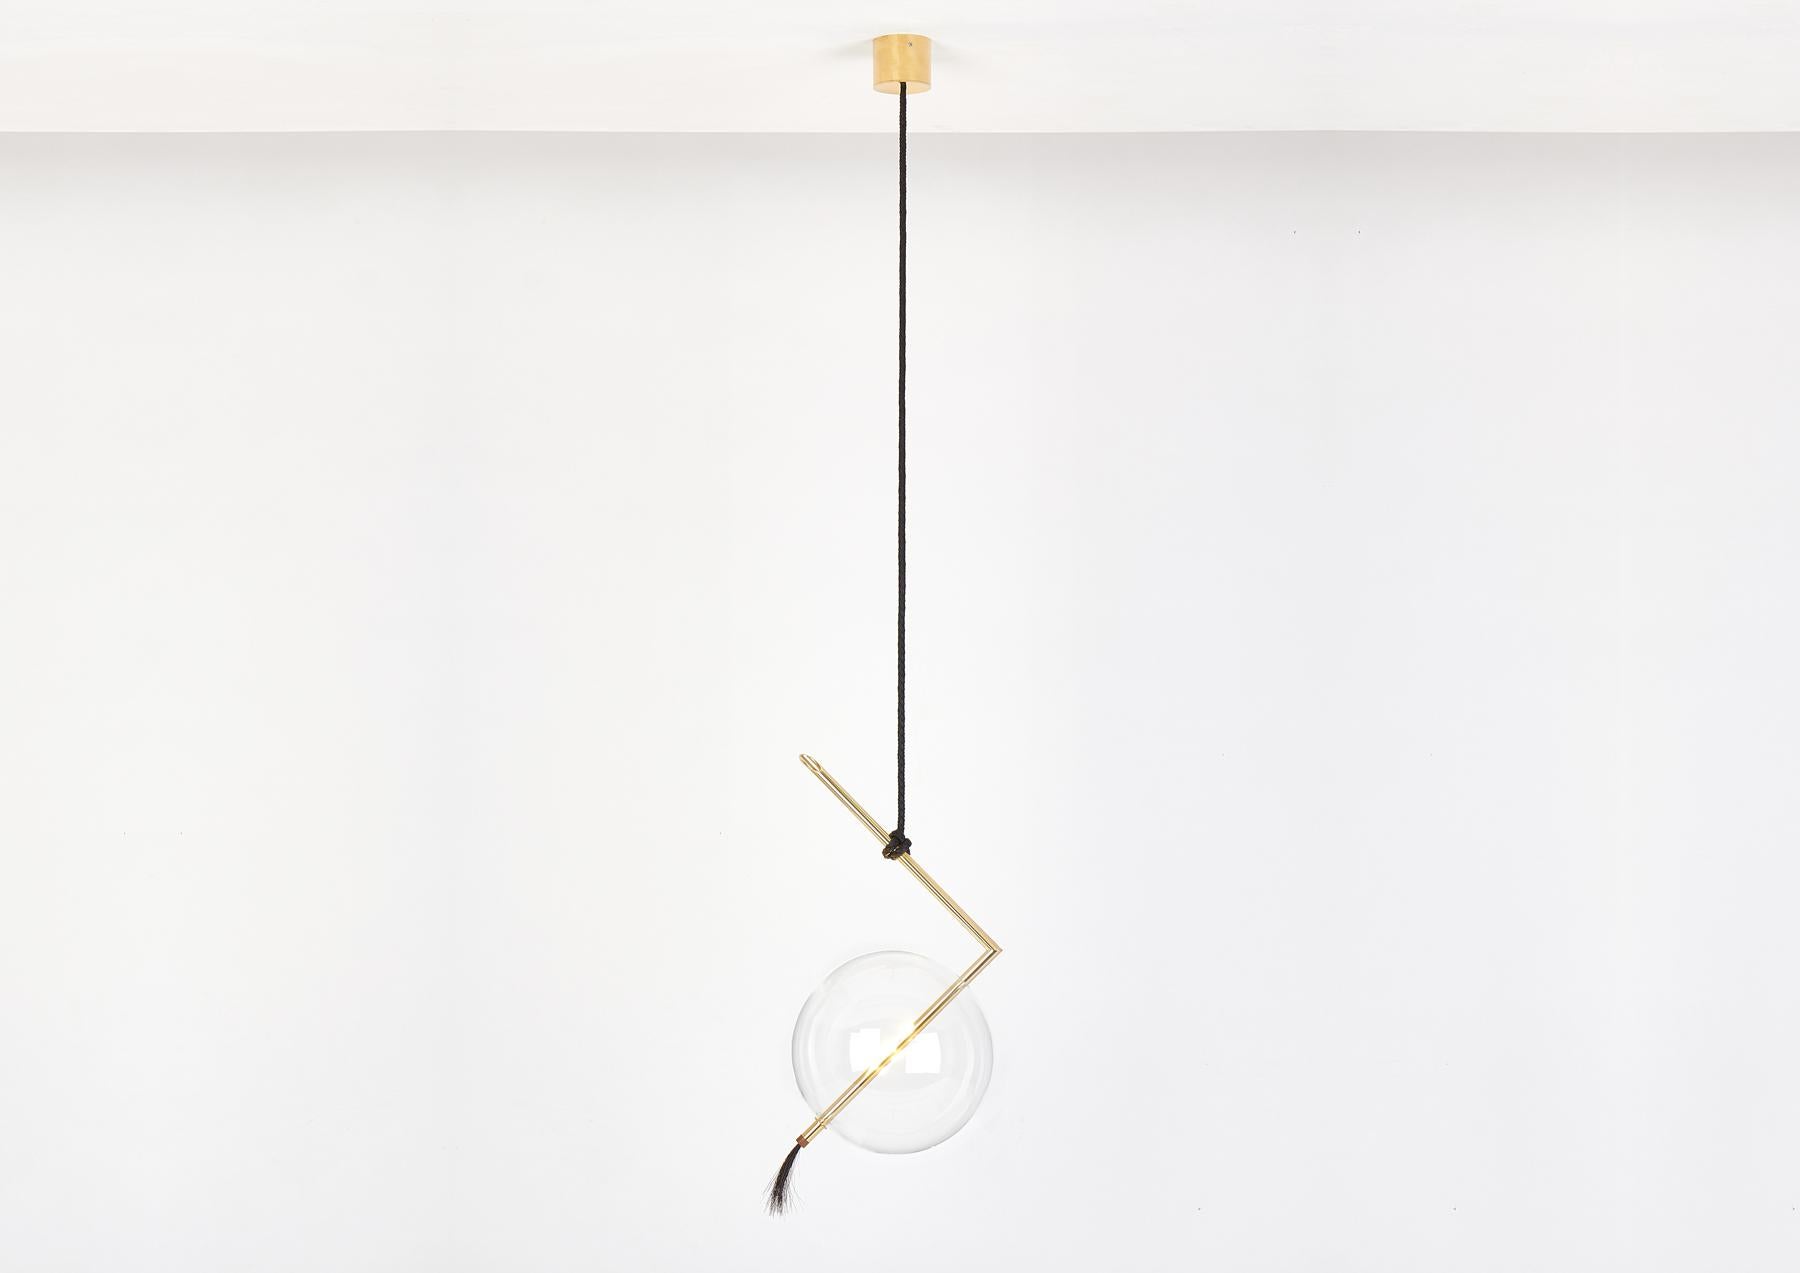 Nuvola pendant floats in space like a jewel hanging from the ceiling, hooked at the end of a leather cord that has been hand-knotted around the brass tube; a perfect equilibrium of contrasting materials, with obsessive attention to details.

The